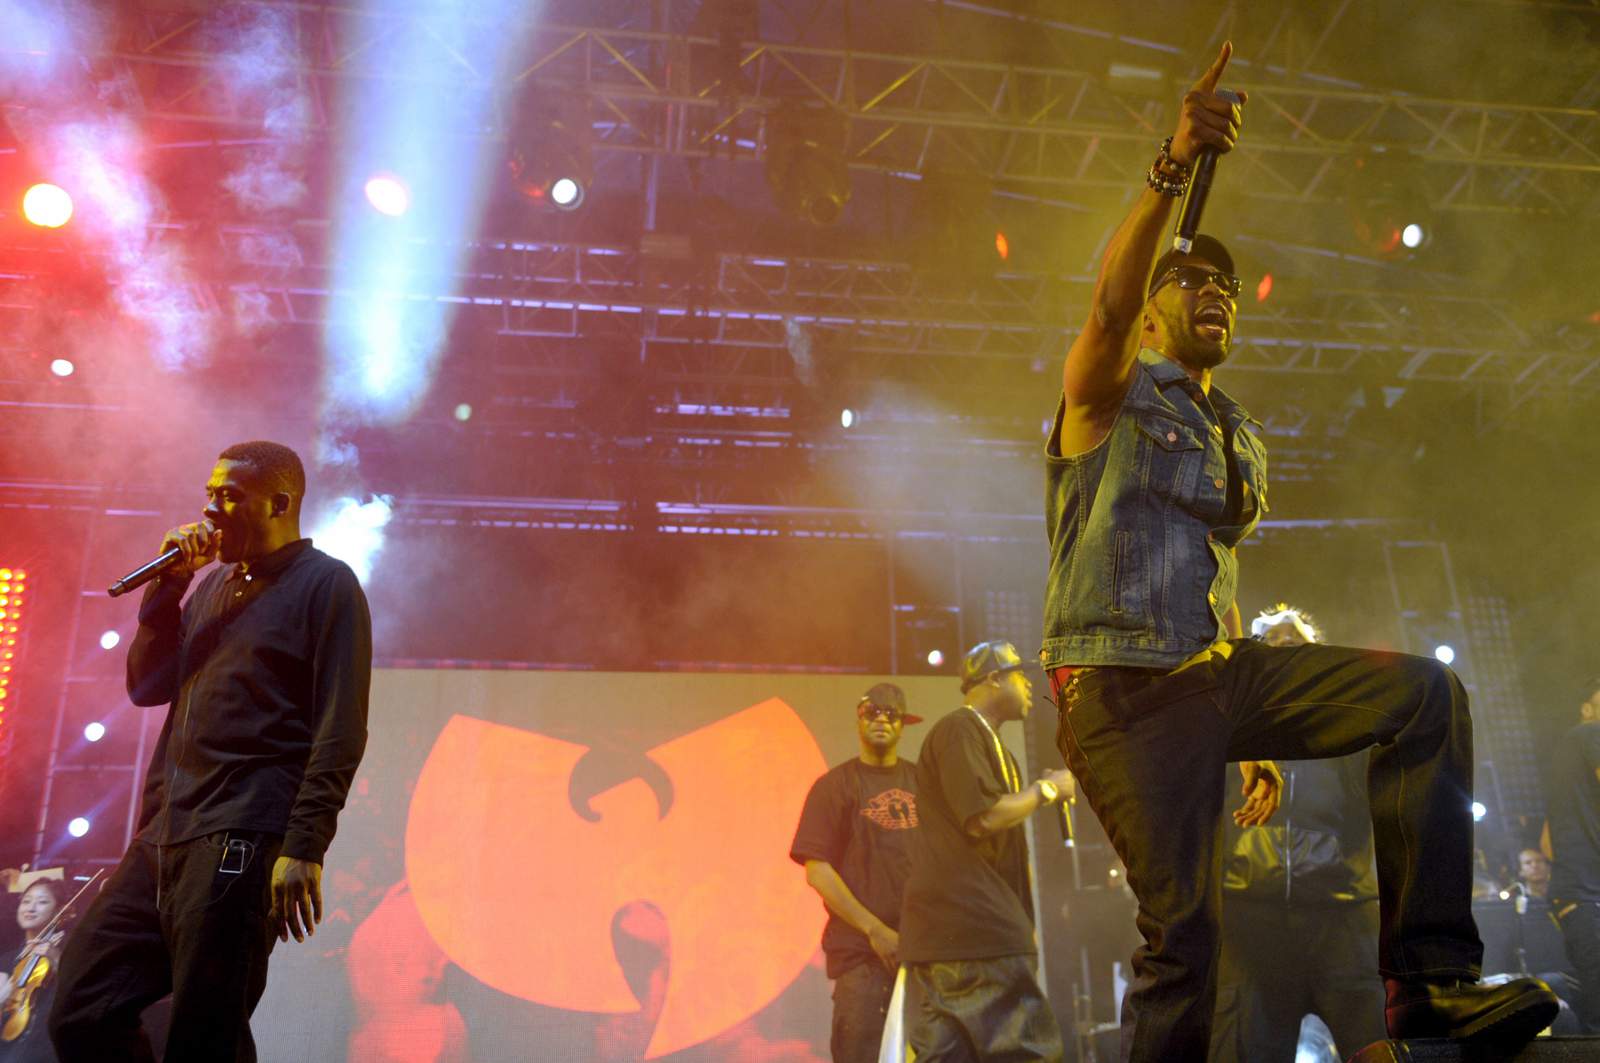 China not convinced by Canada's Wu-Tang Clan explanation